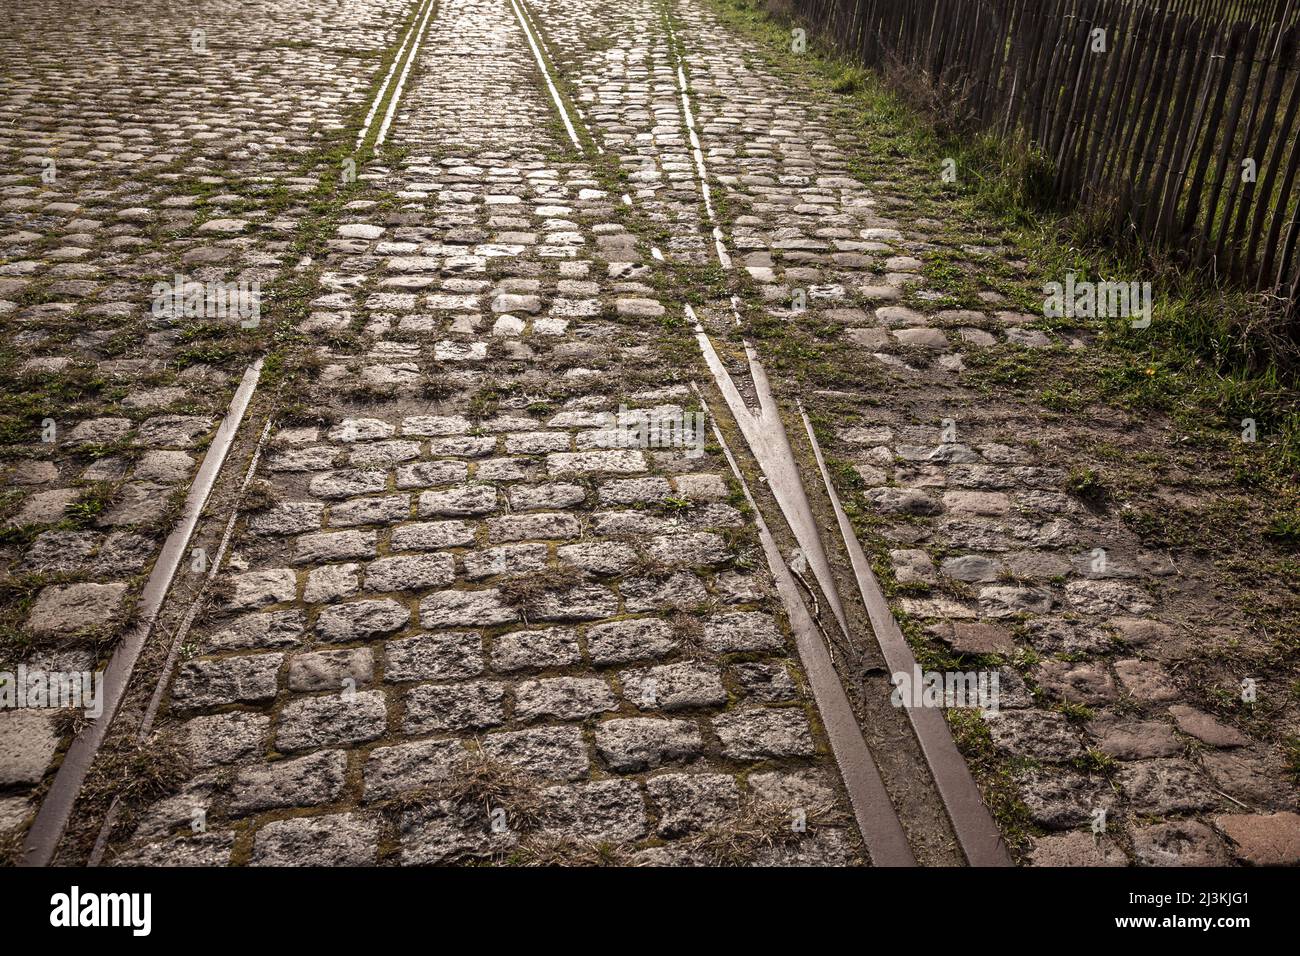 Picture of a tram track on a tramway on a cobblestone street of an urban downtown, neglected, abandoned, rusting and decaying. Stock Photo